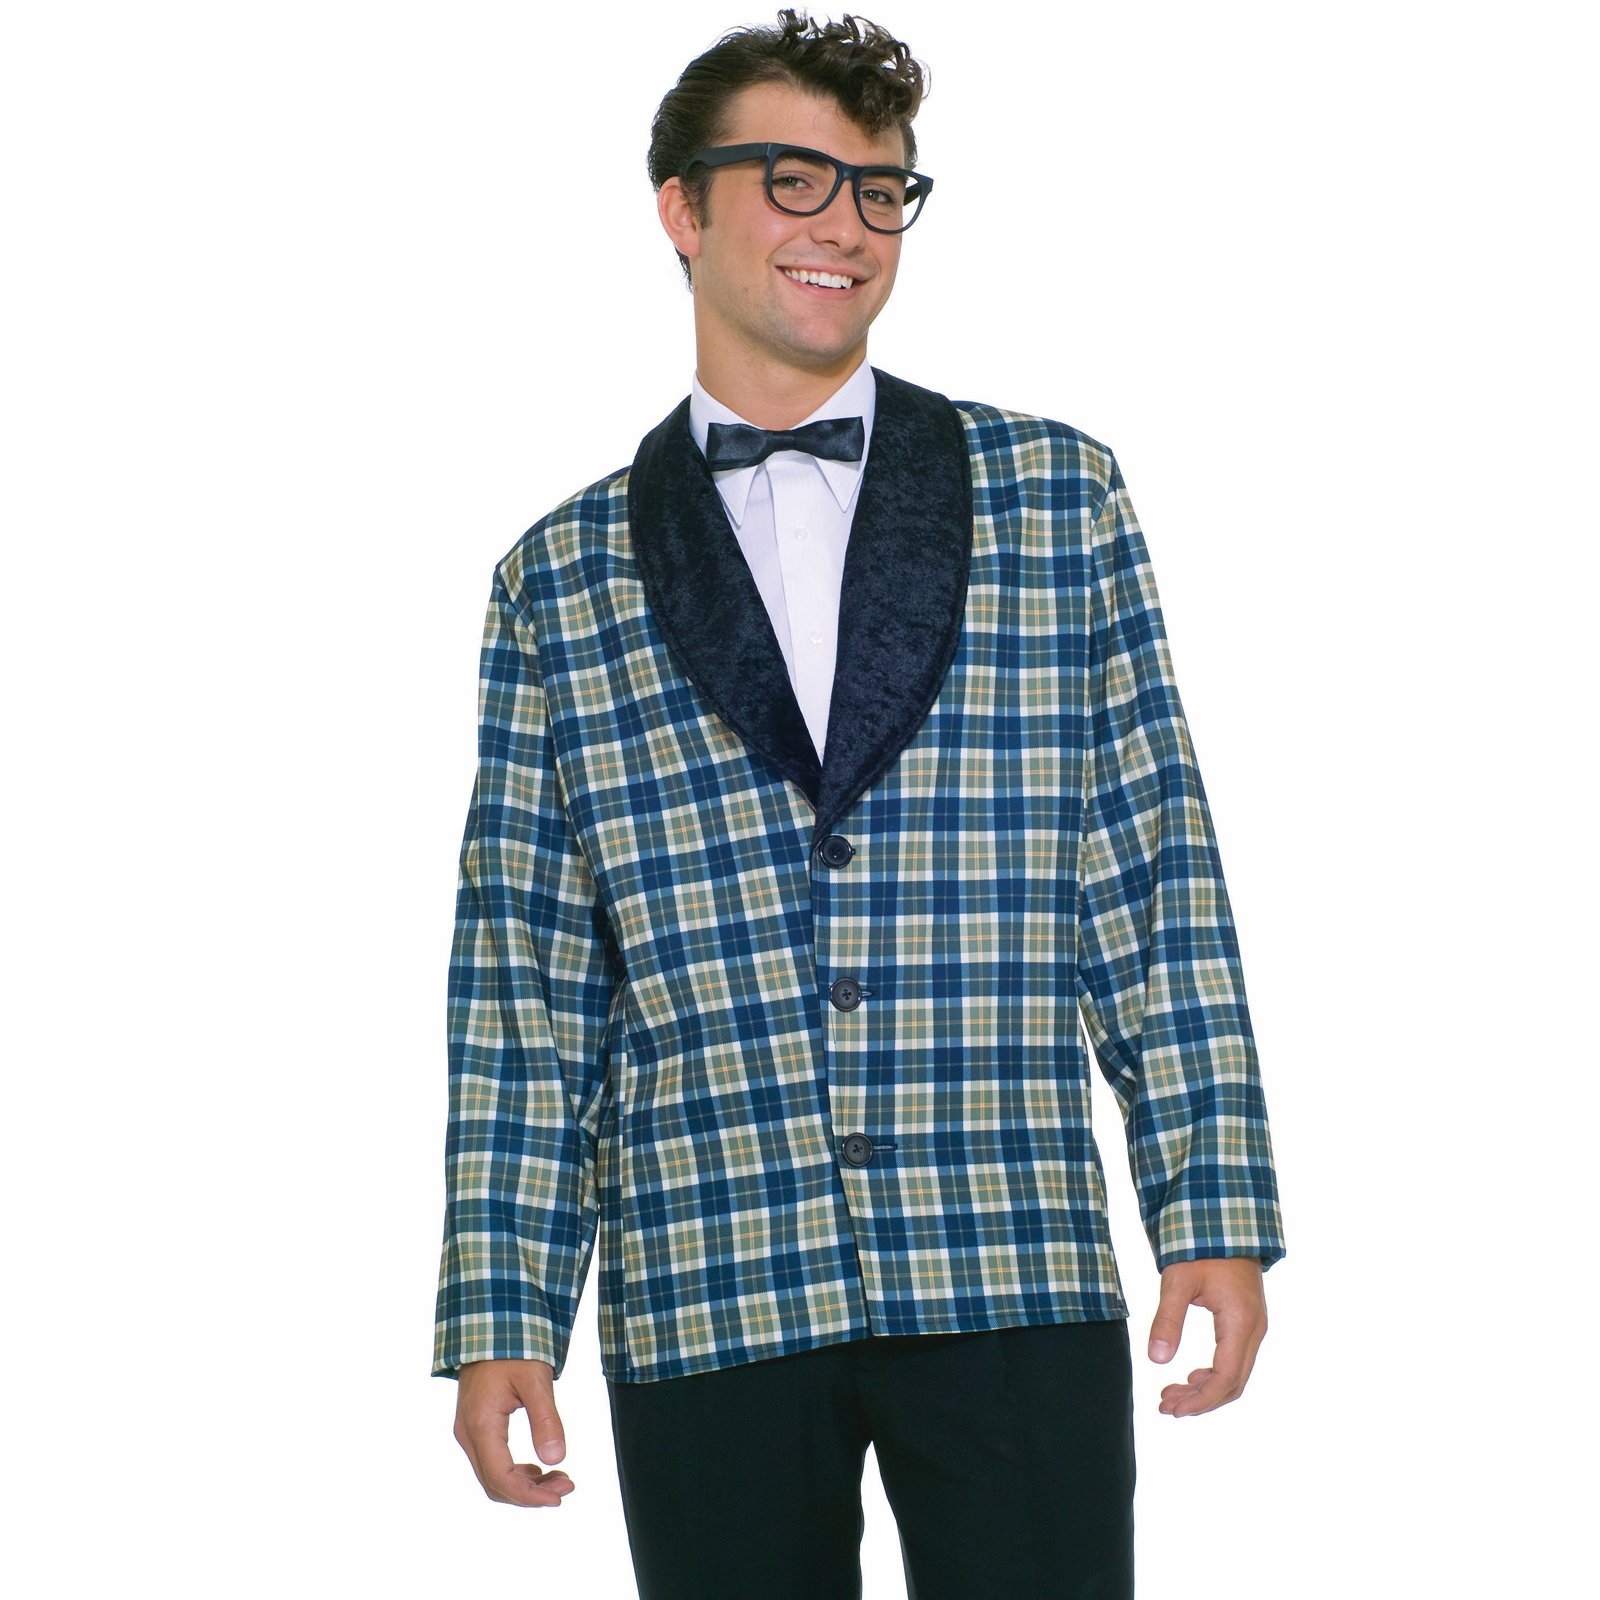 Good Buddy 50's Jacket Adult Costume - Click Image to Close